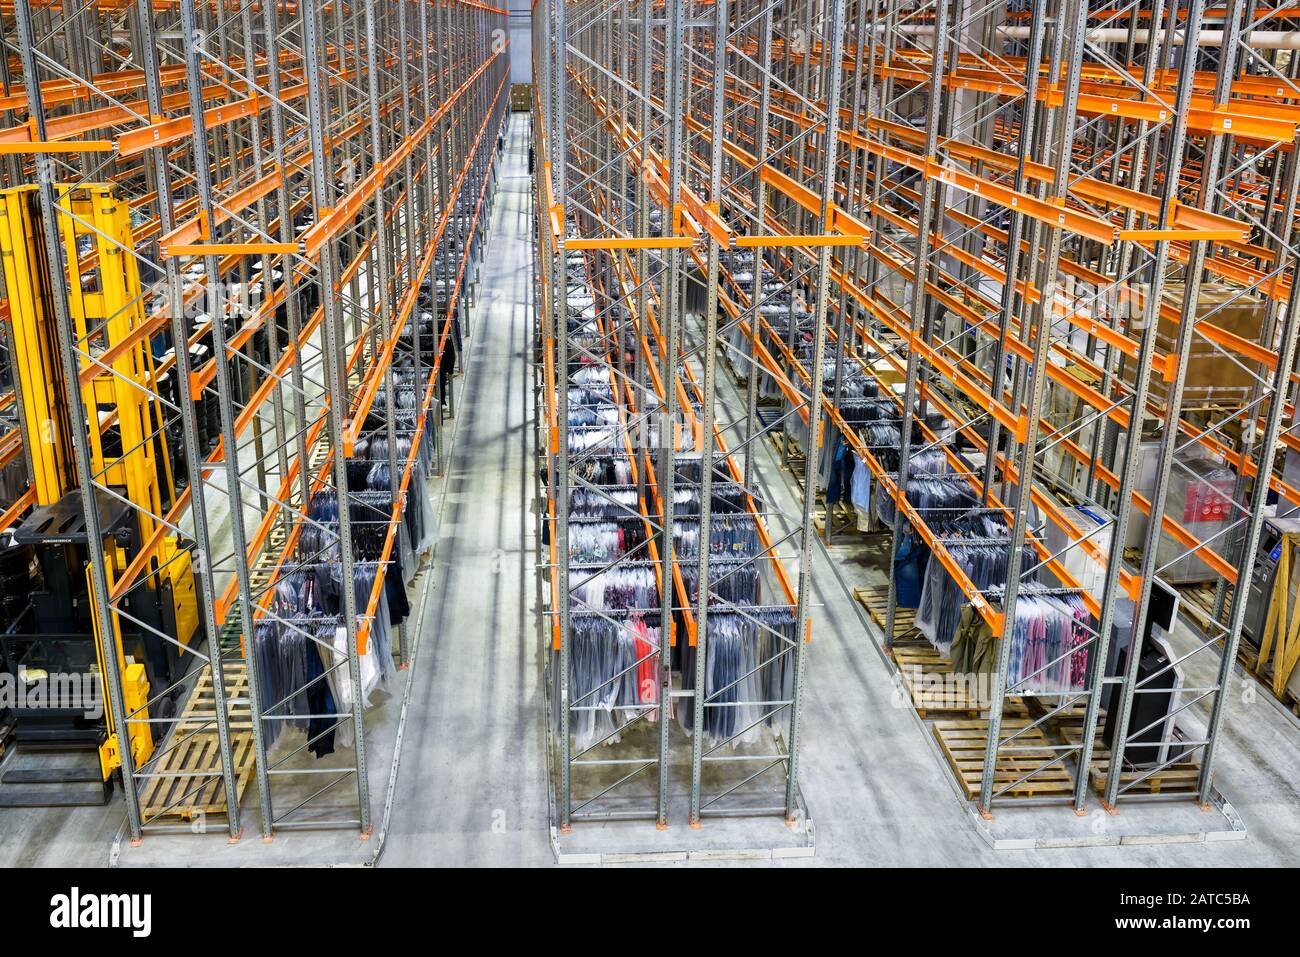 Moscow - March 18, 2016: Panoramic view of the interior of the large modern warehouse. Moscow is a modern city with well-developed logistics infrastru Stock Photo